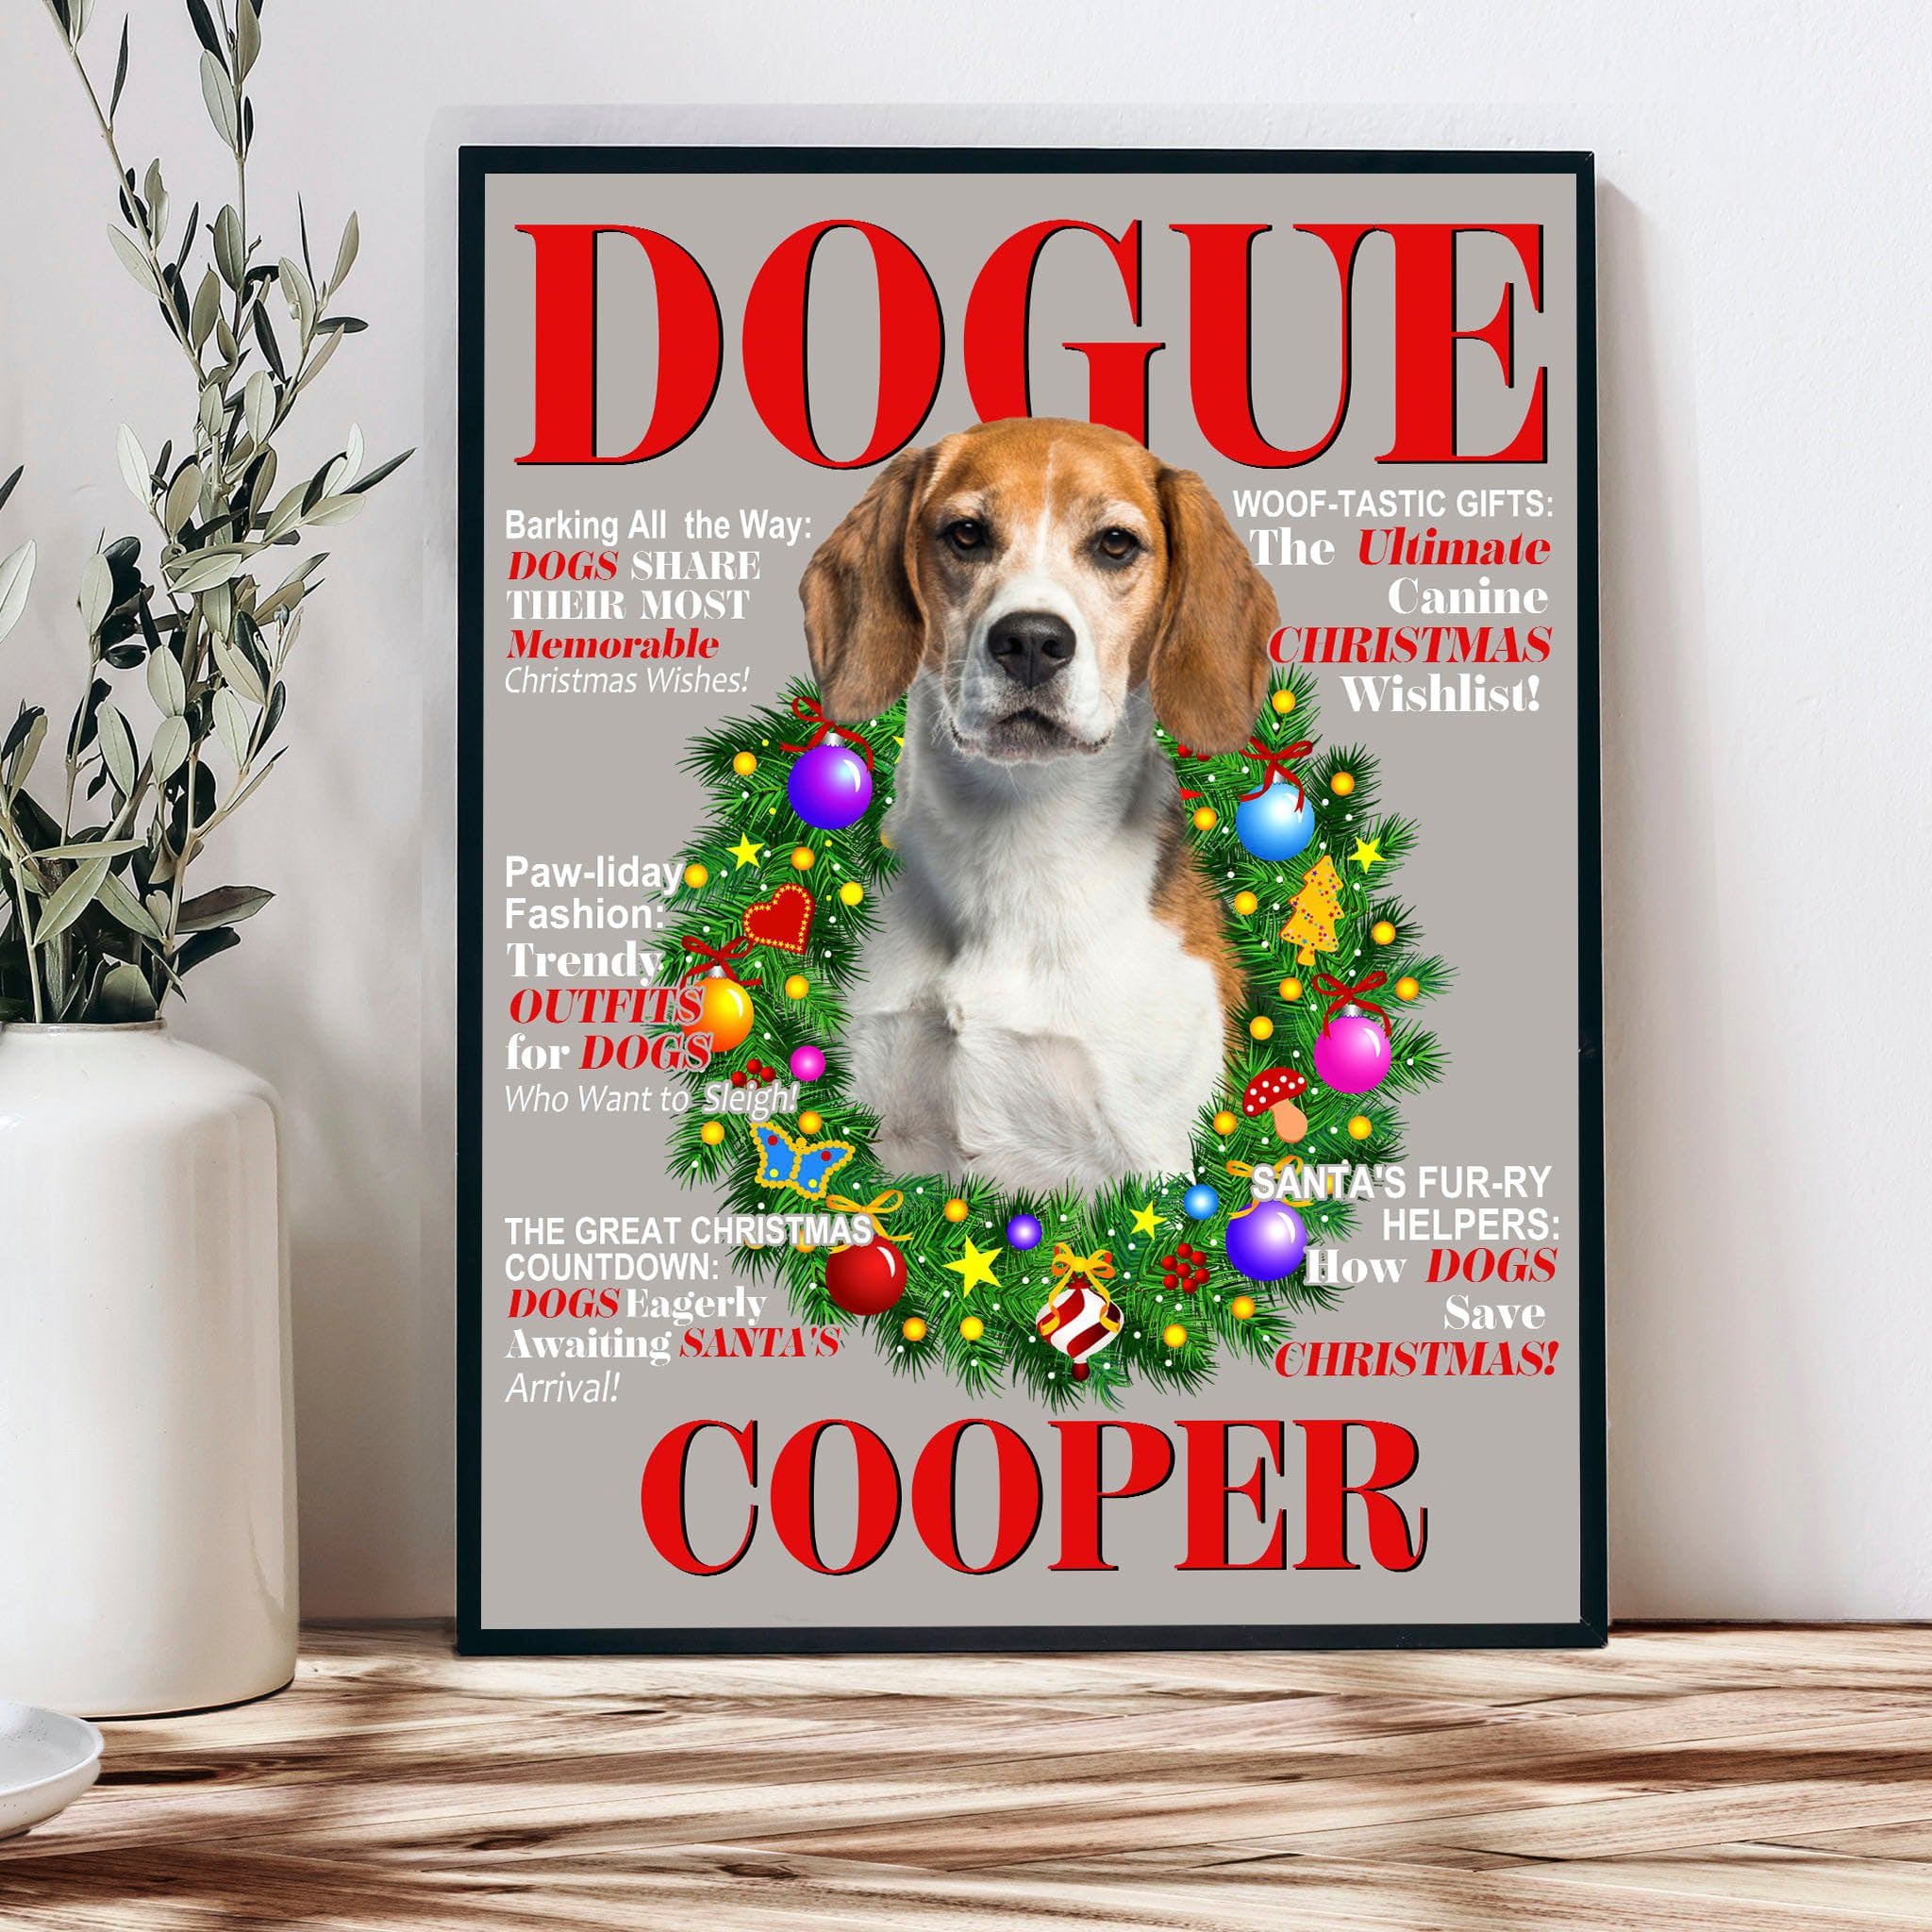 USA MADE Personalized Pet Portrait - Gift For Dog Lovers - Dougue Christmas Magazine - Personalized Pet Poster Canvas Print - Digital Download